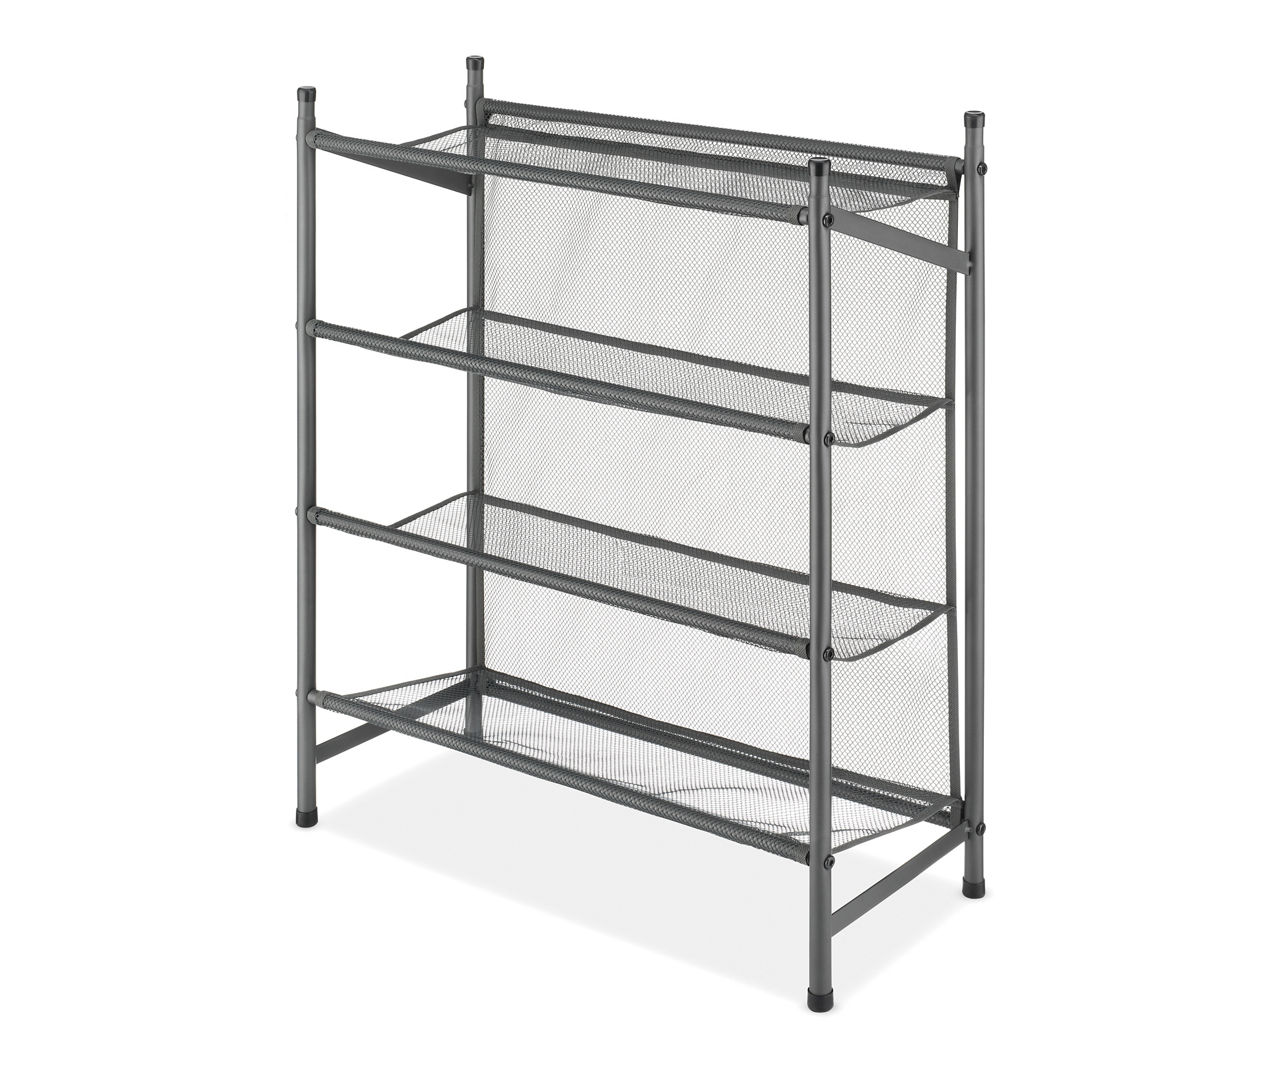 Home Expressions 4-Shelf Shoe Rack, Color: Grey - JCPenney